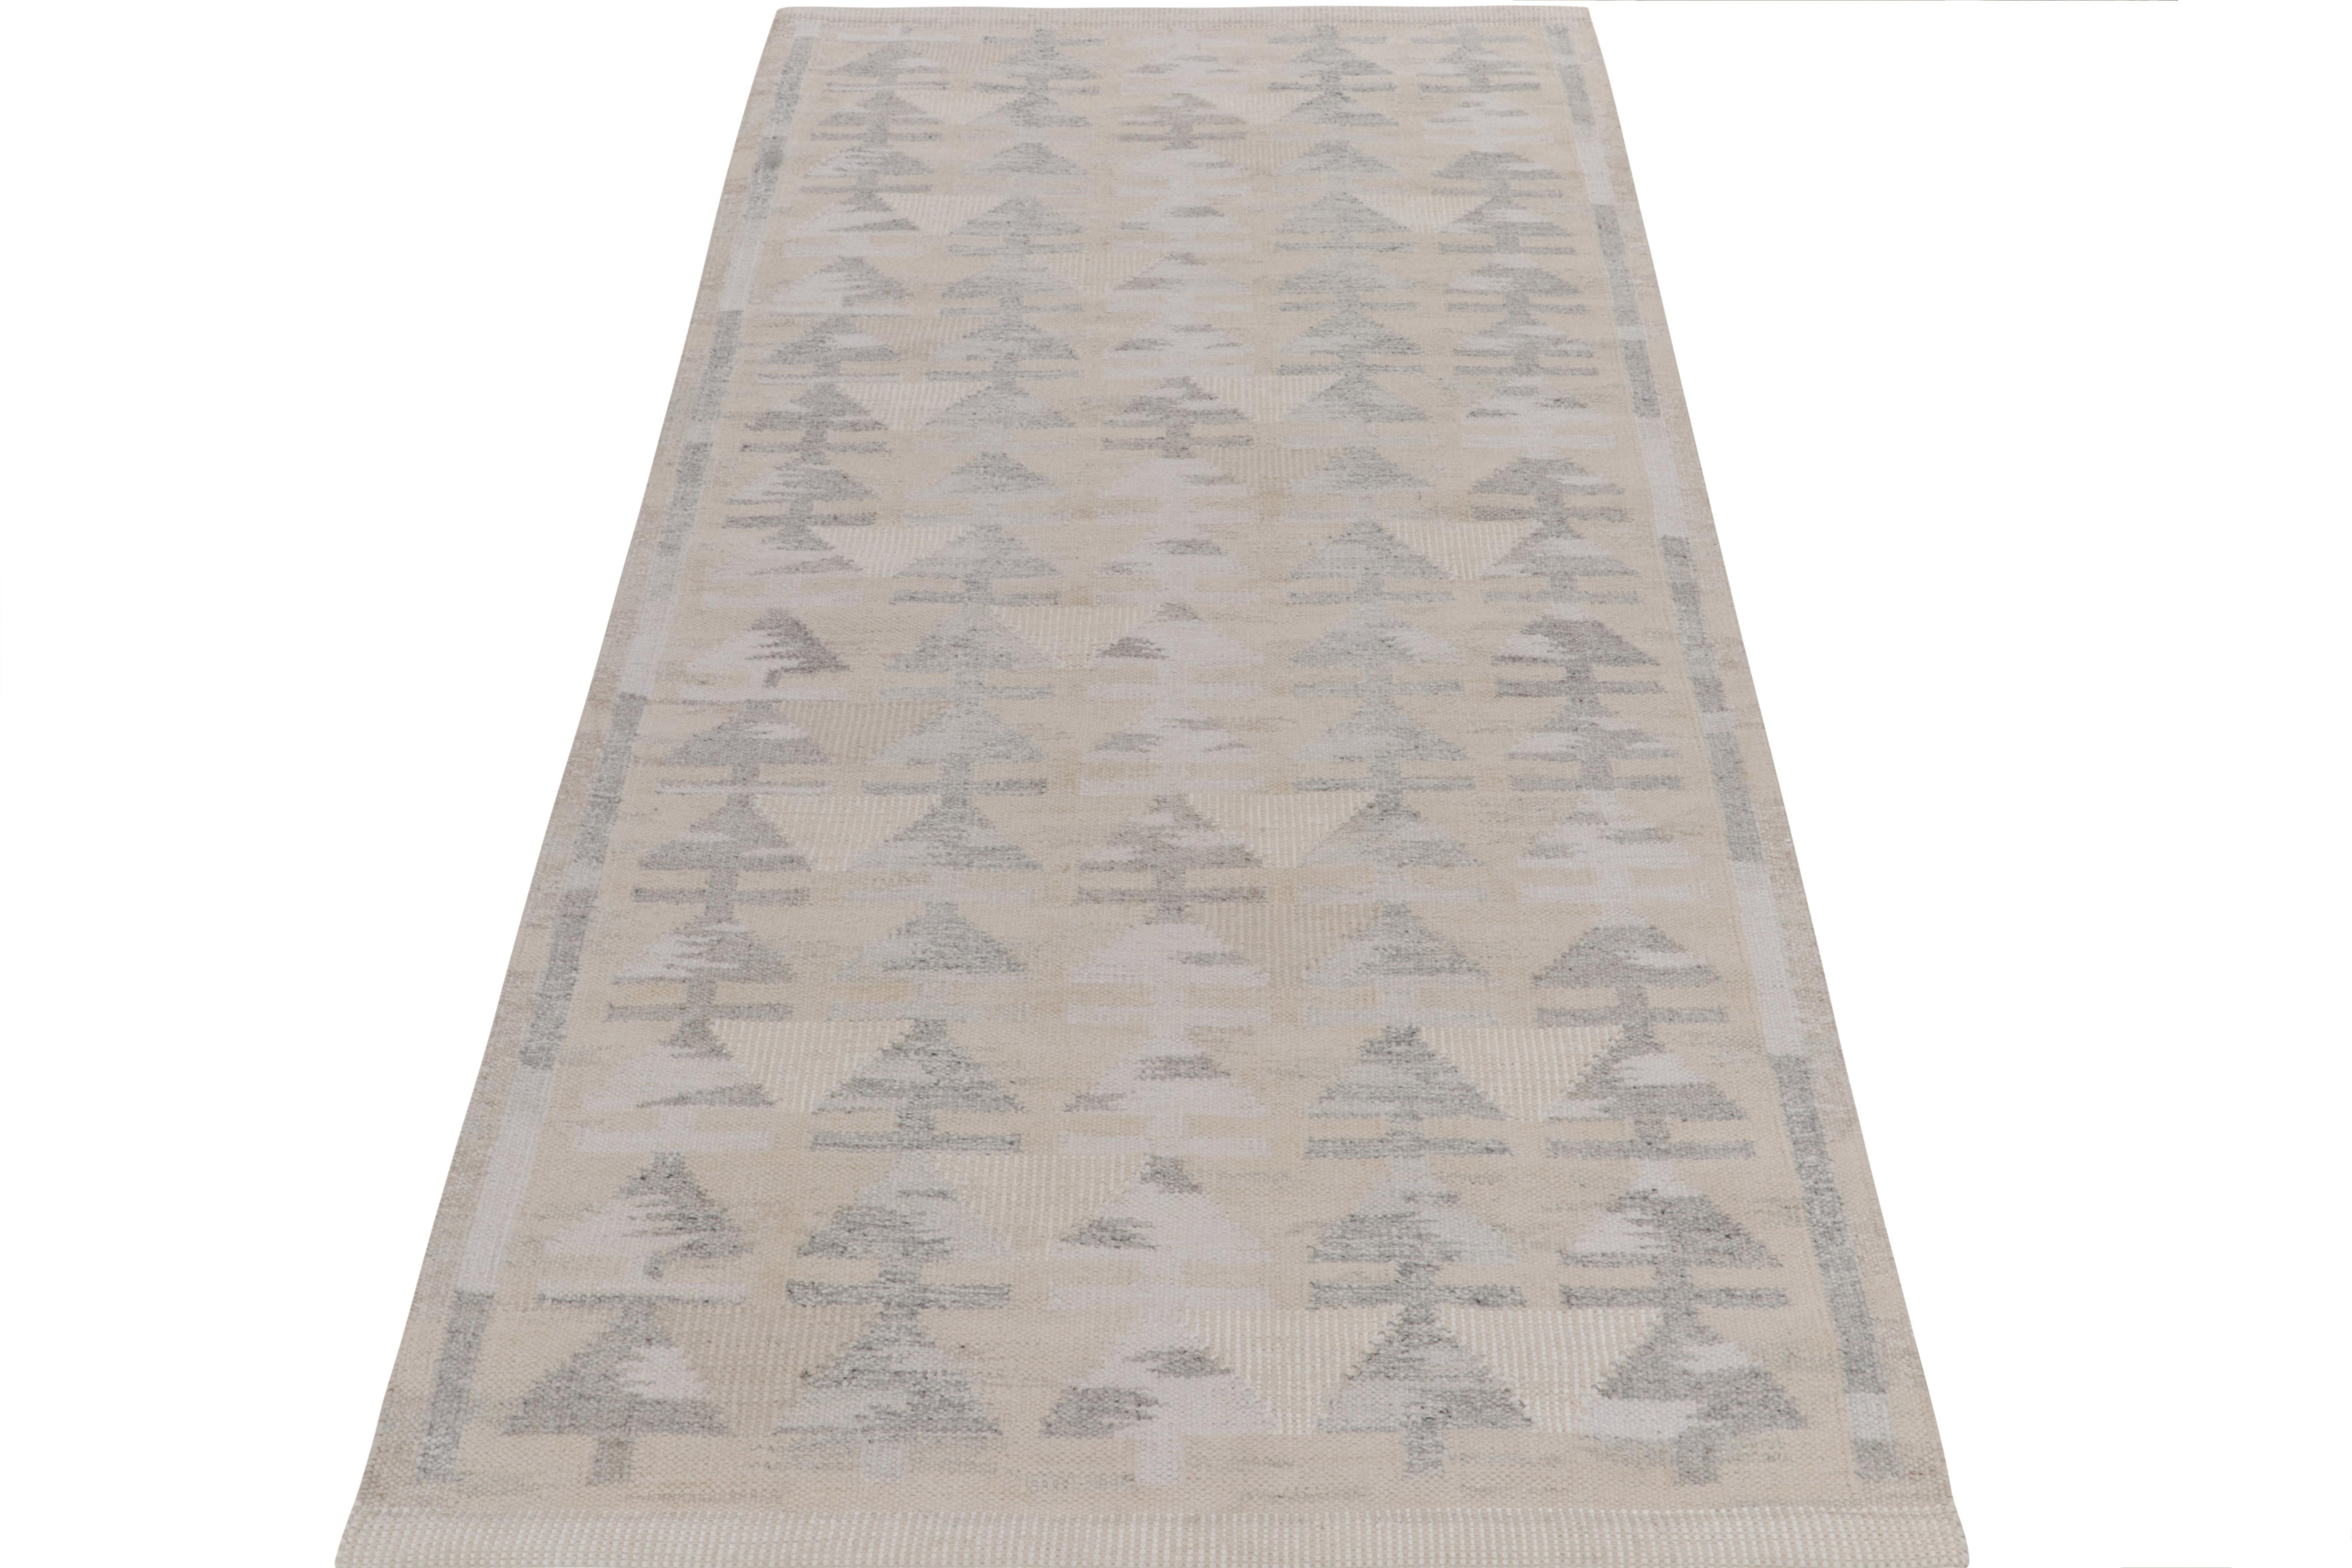 Handwoven in fine quality wool, a 5x10 kilim reflecting our passion for Scandinavian flatweaves, joining our titular award-winning collection. The rug features geometric repetition in sublime, chic gray & beige with off-white accents enjoying